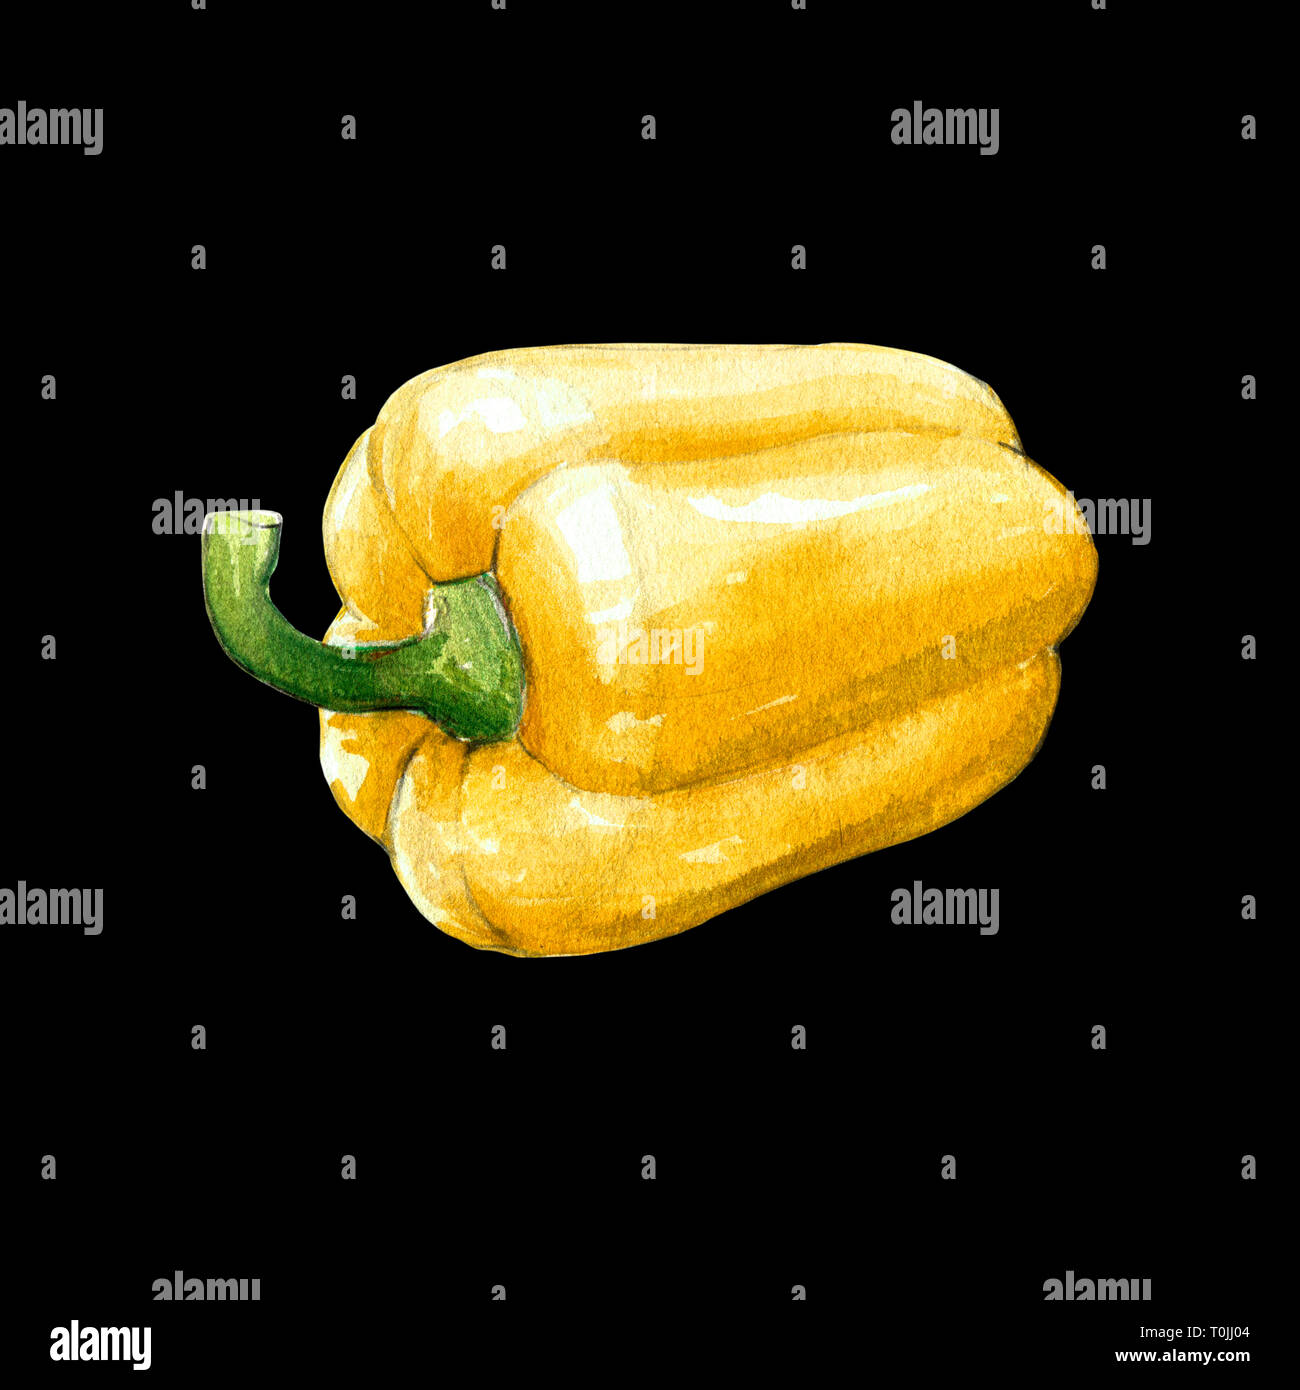 yellow bell pepper watercolor illustration on black background Stock Photo